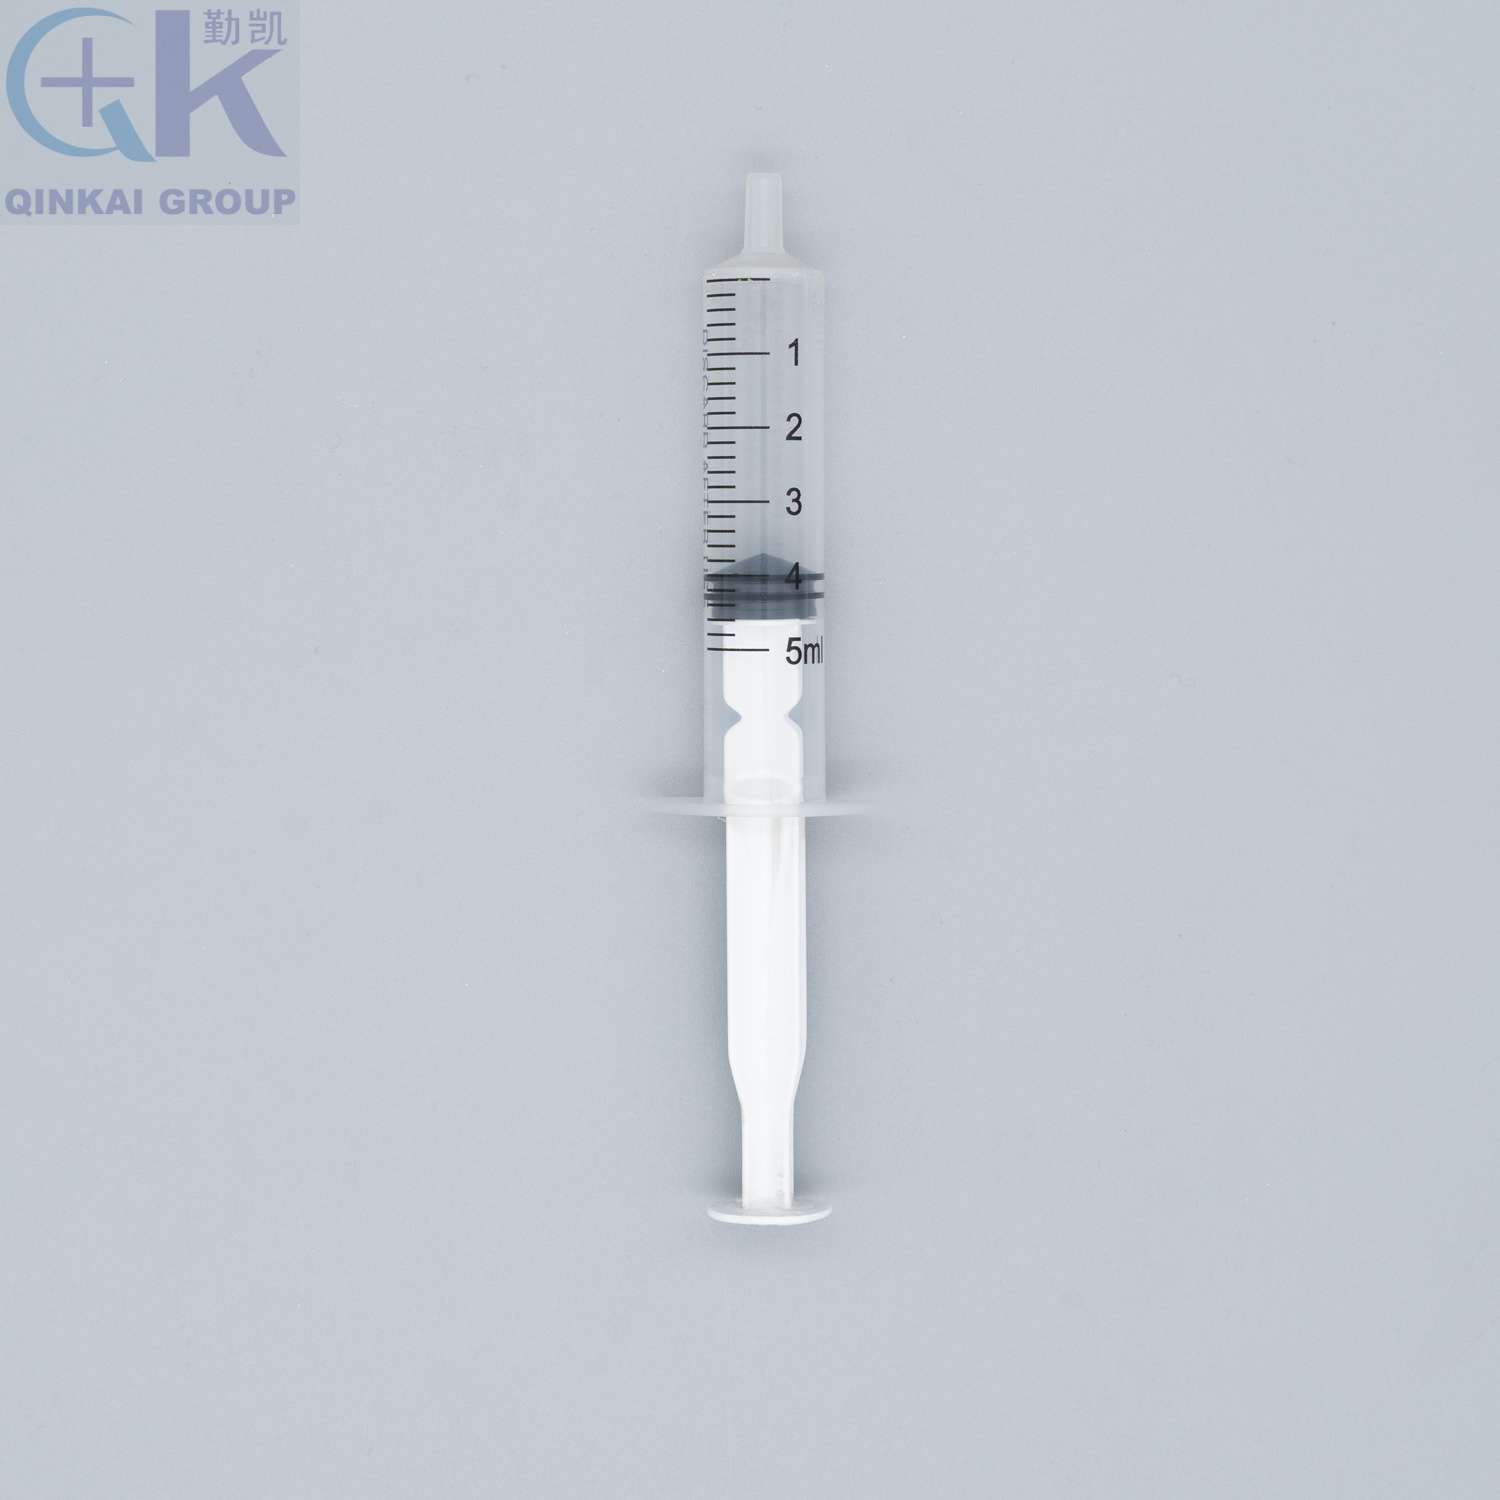 Plastic-absorbing packaging for syringes